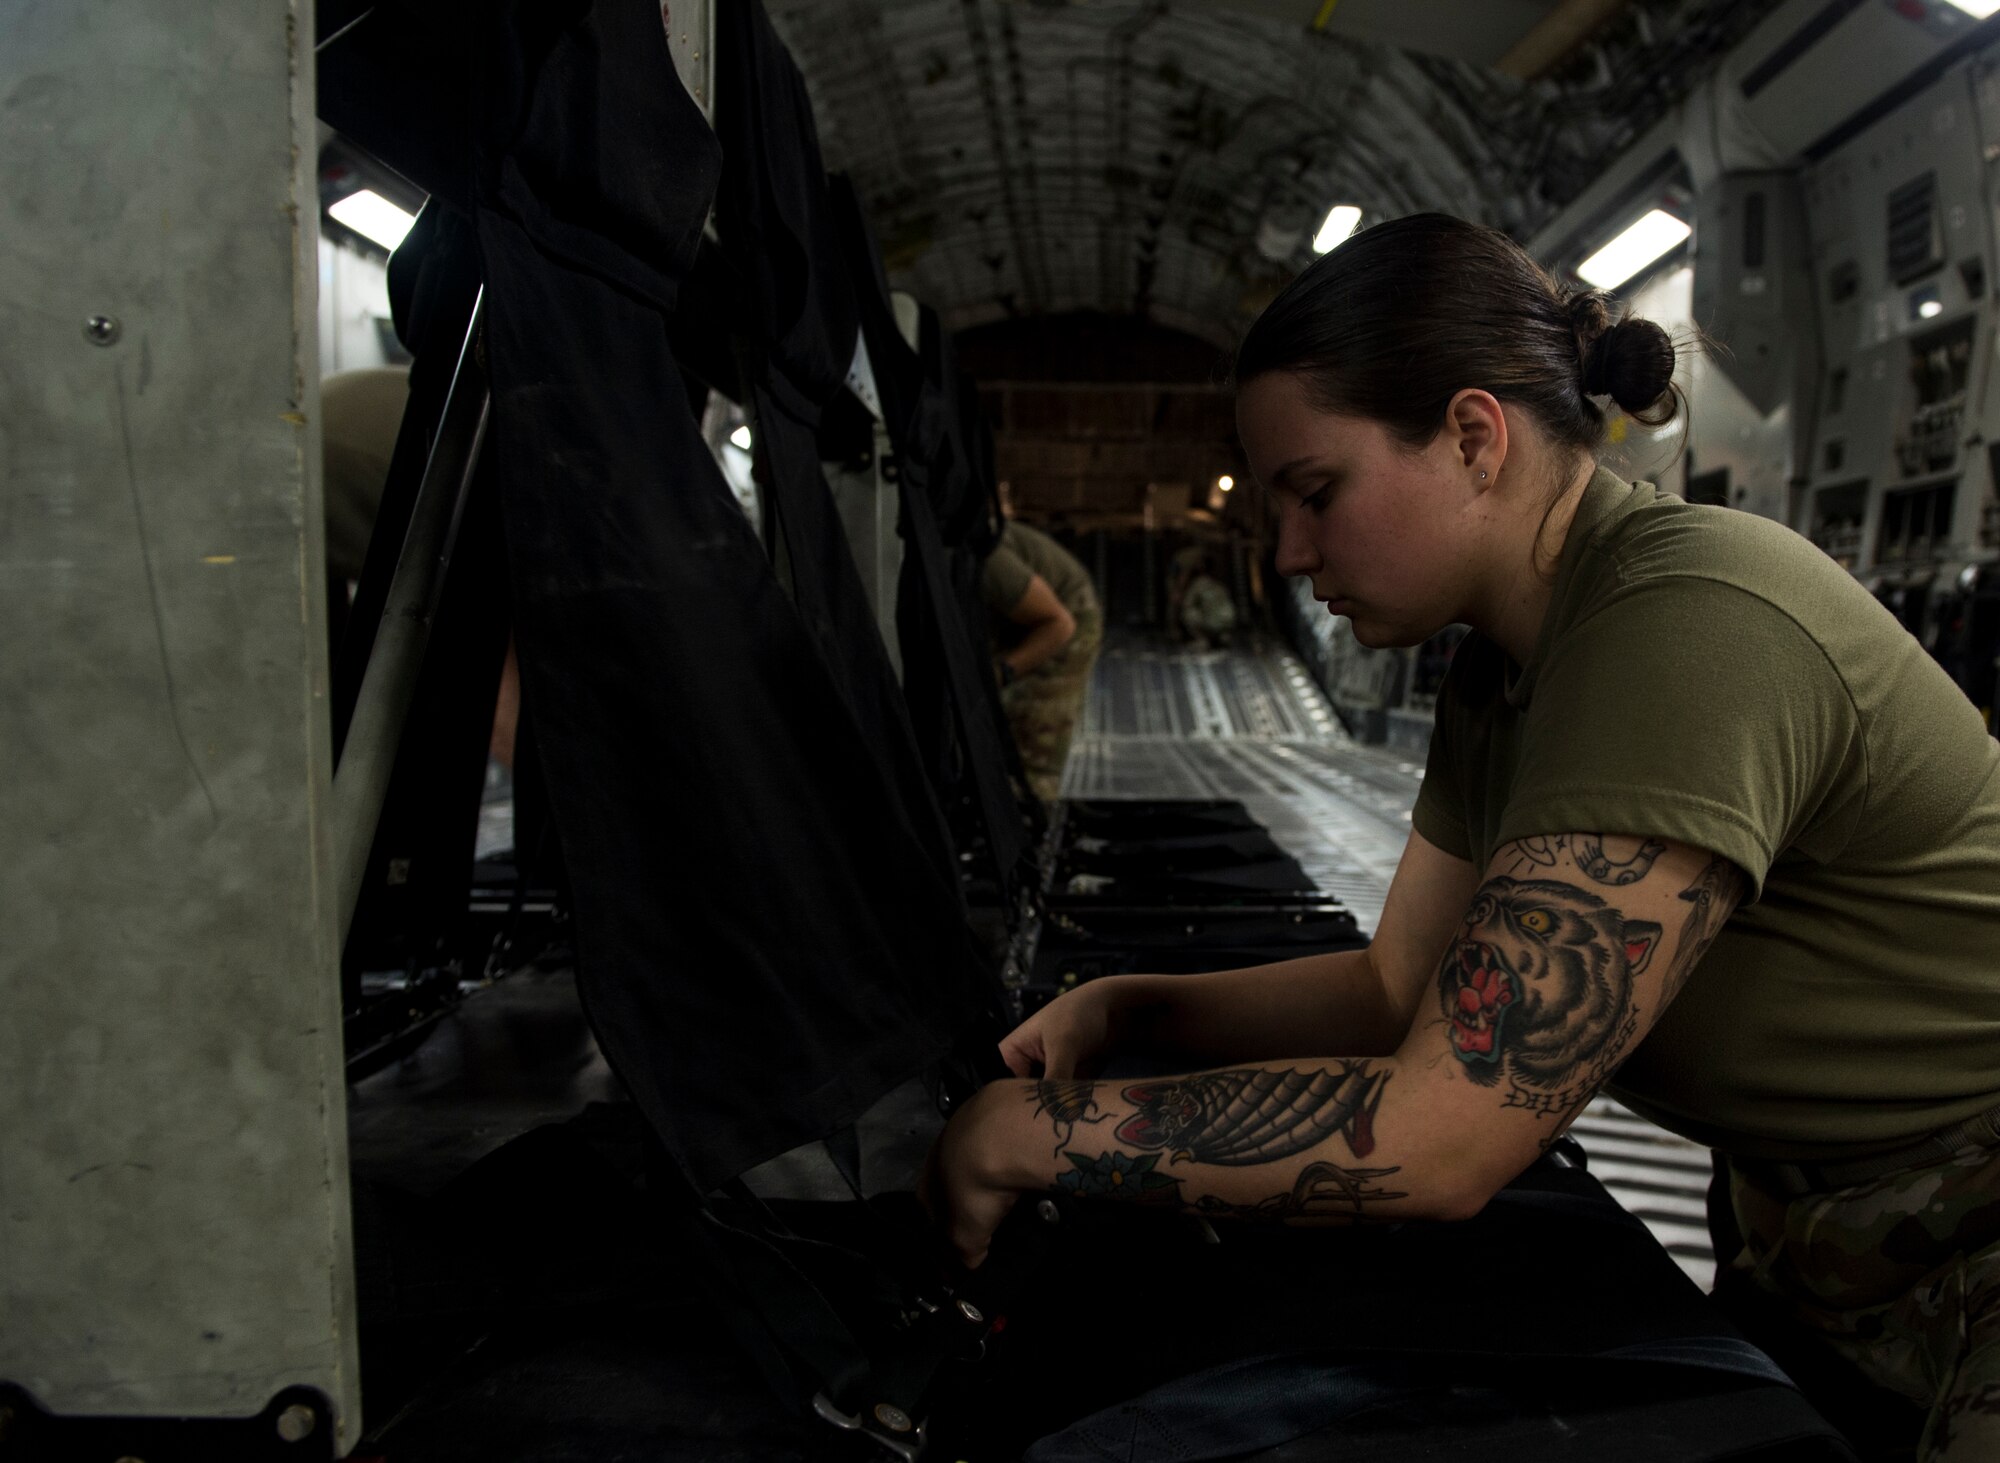 A U.S. Air Force loadmaster assigned to the 816th Expeditionary Airlift Squadron assembles passenger seats on a U.S. Air Force C-17 Globemaster III at Al Udeid Air Base, Qatar, Jan. 10, 2020.